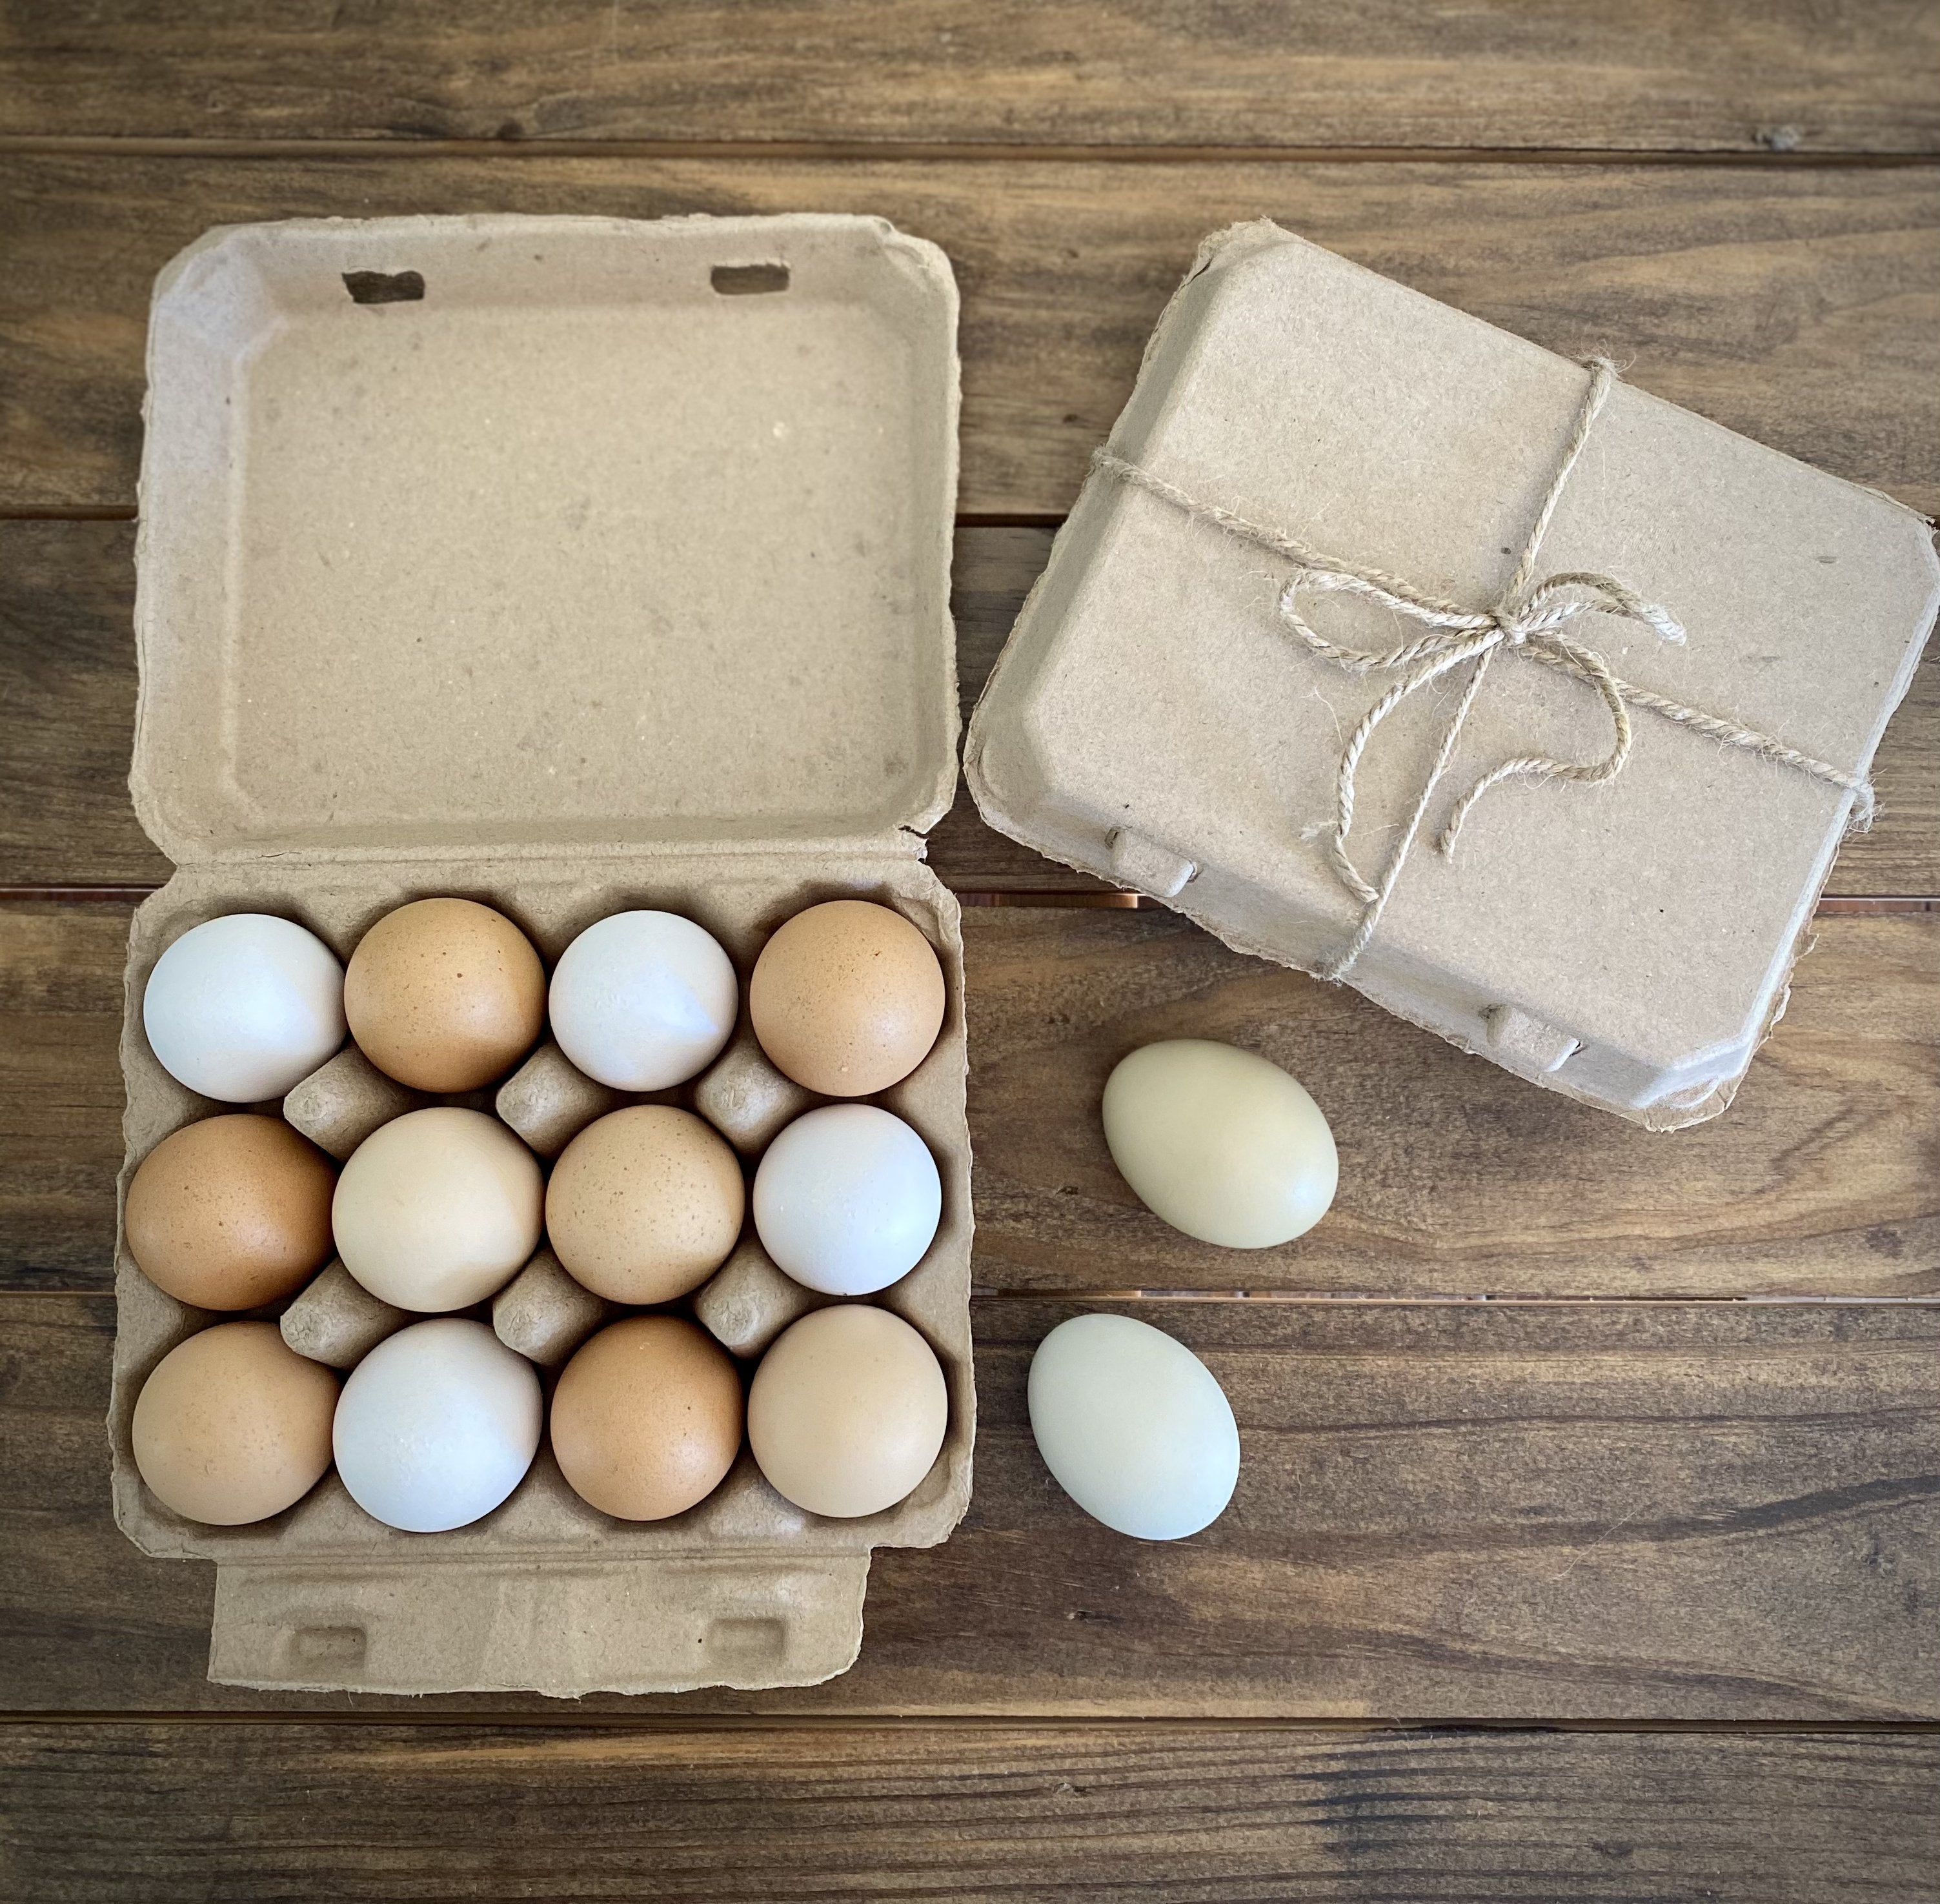 Vintage Blank Egg Cartons - 3x4 Style Made from Recycled Cardboard